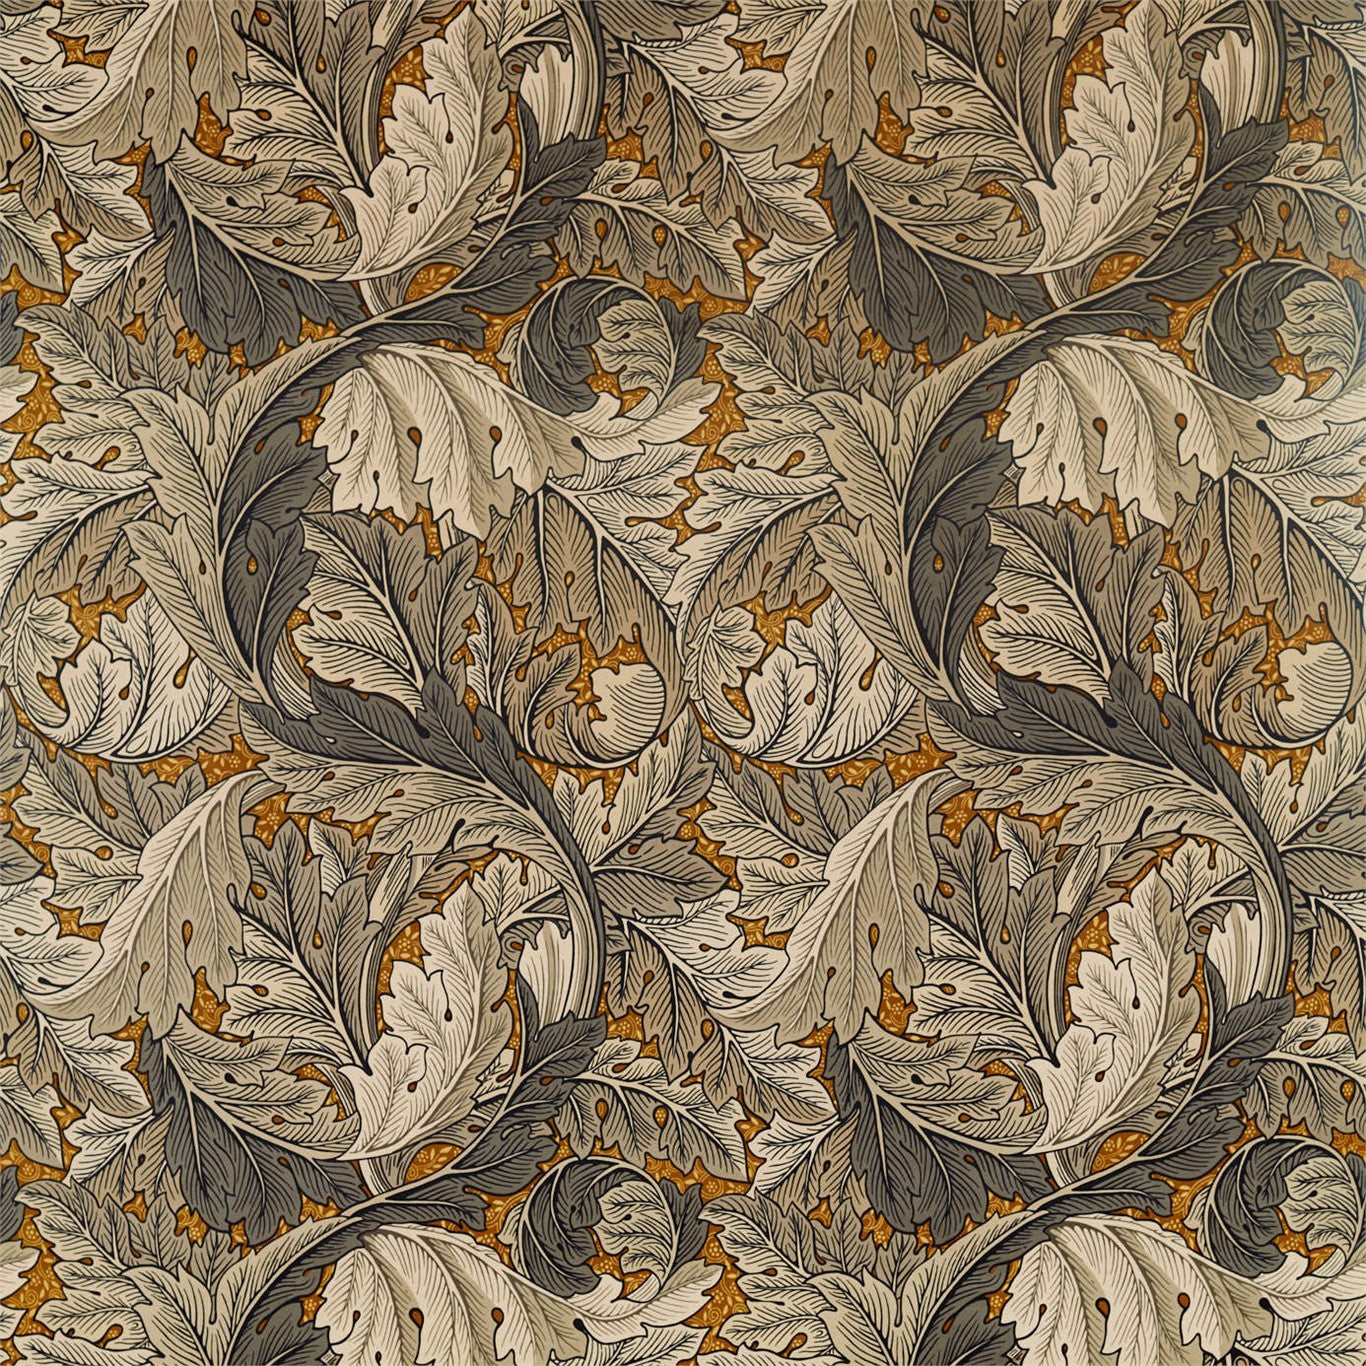 Acanthus Fabric by Morris & Co. - DMA4226400 - Mustard/Grey